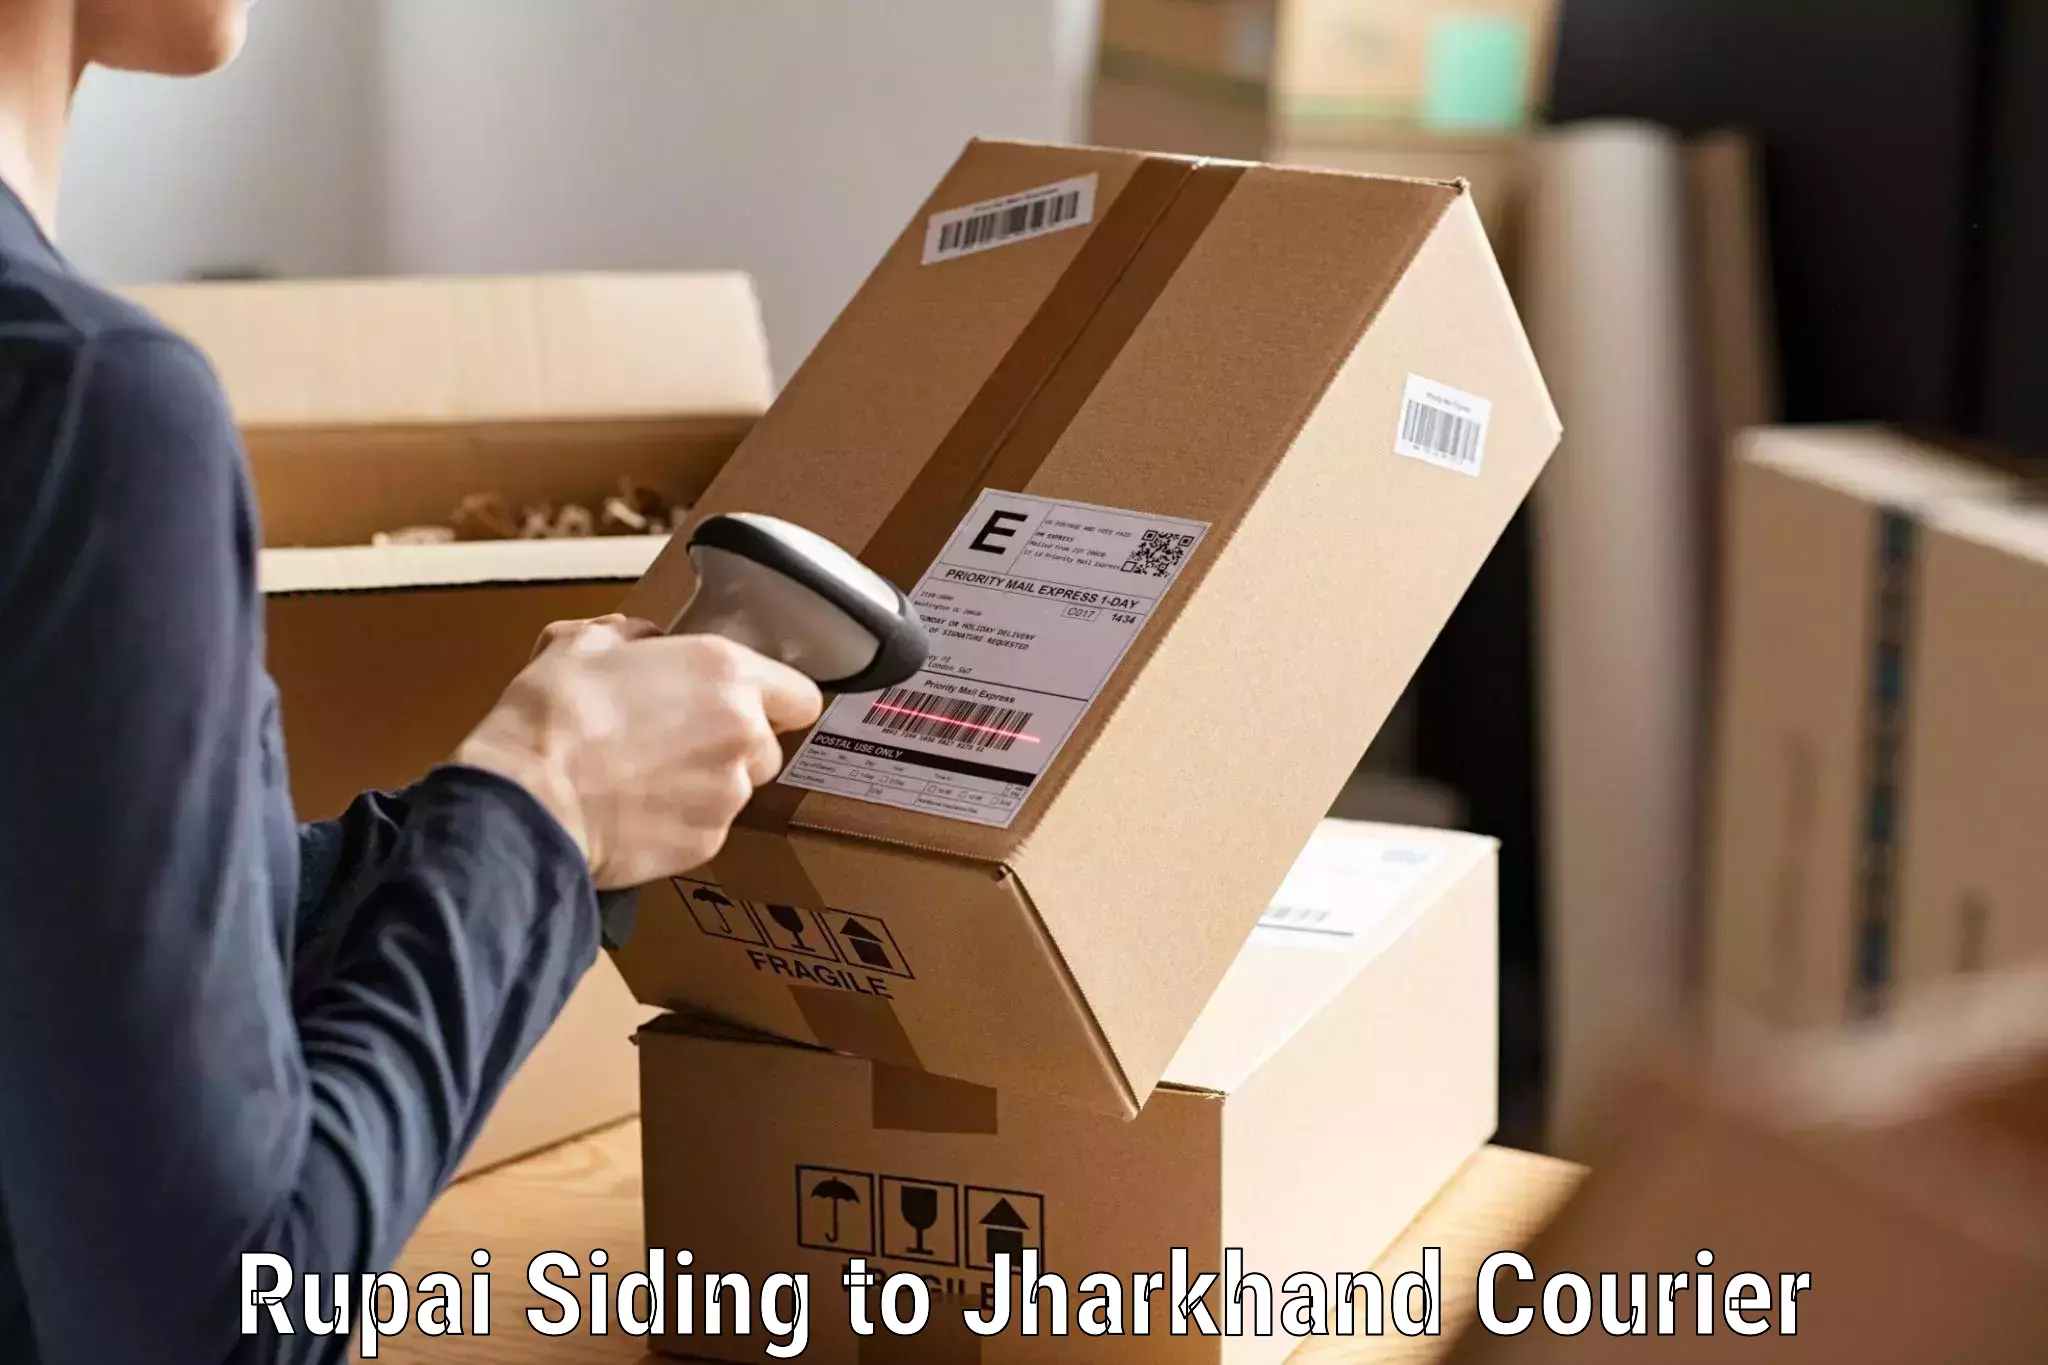 Nationwide parcel services Rupai Siding to Dhanbad